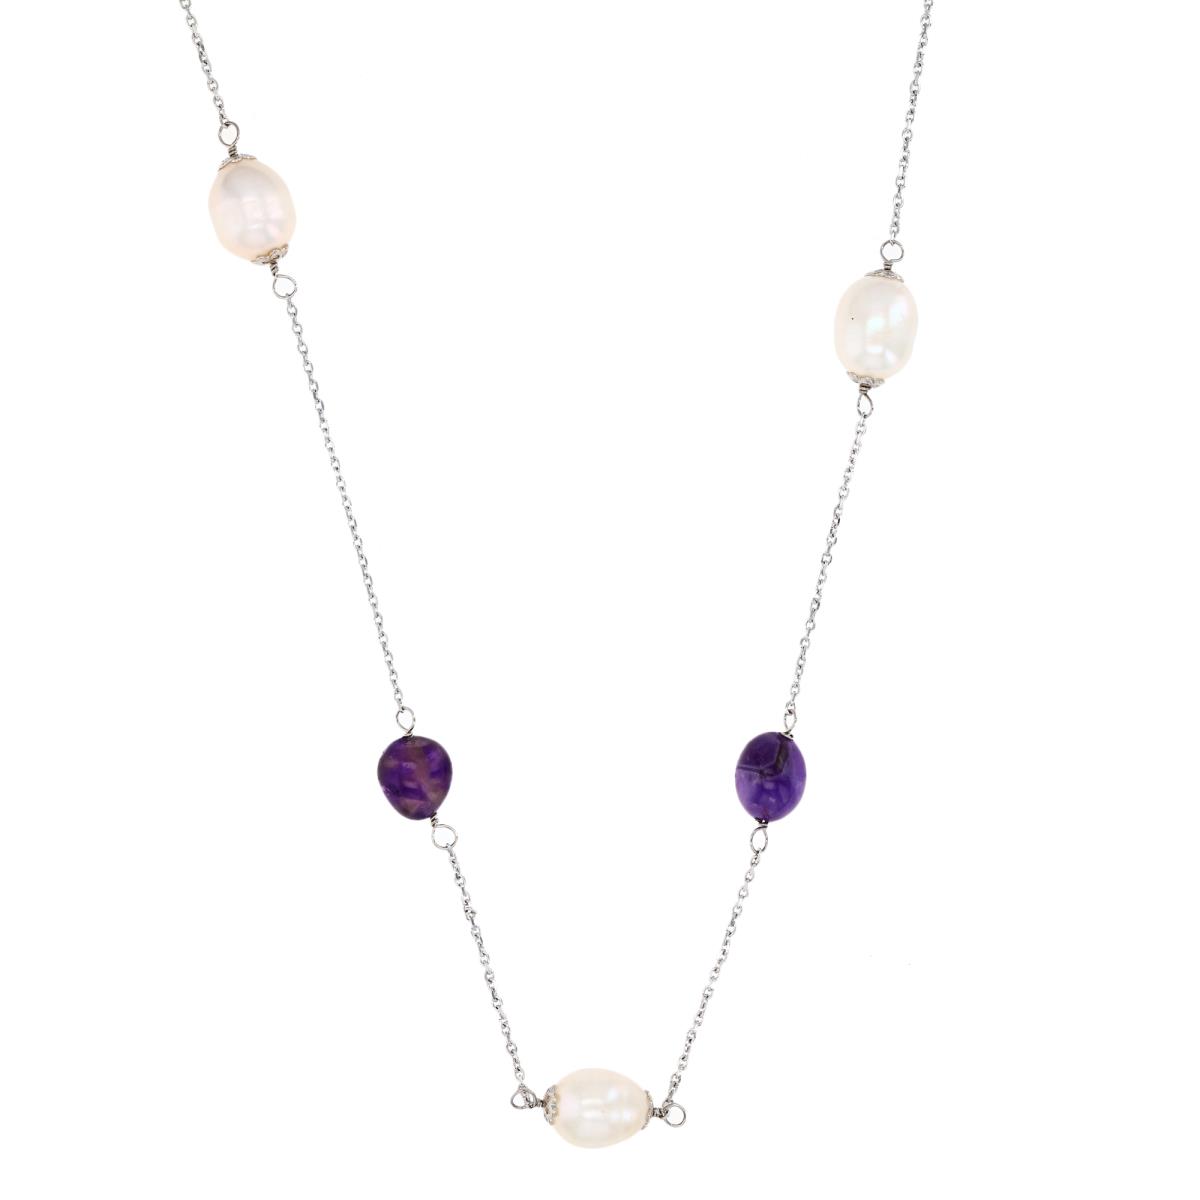 Sterling Silver Rhodium & White Rice FW Pearl and Irregular Mixed Shape Amethyst 36" Station Necklace